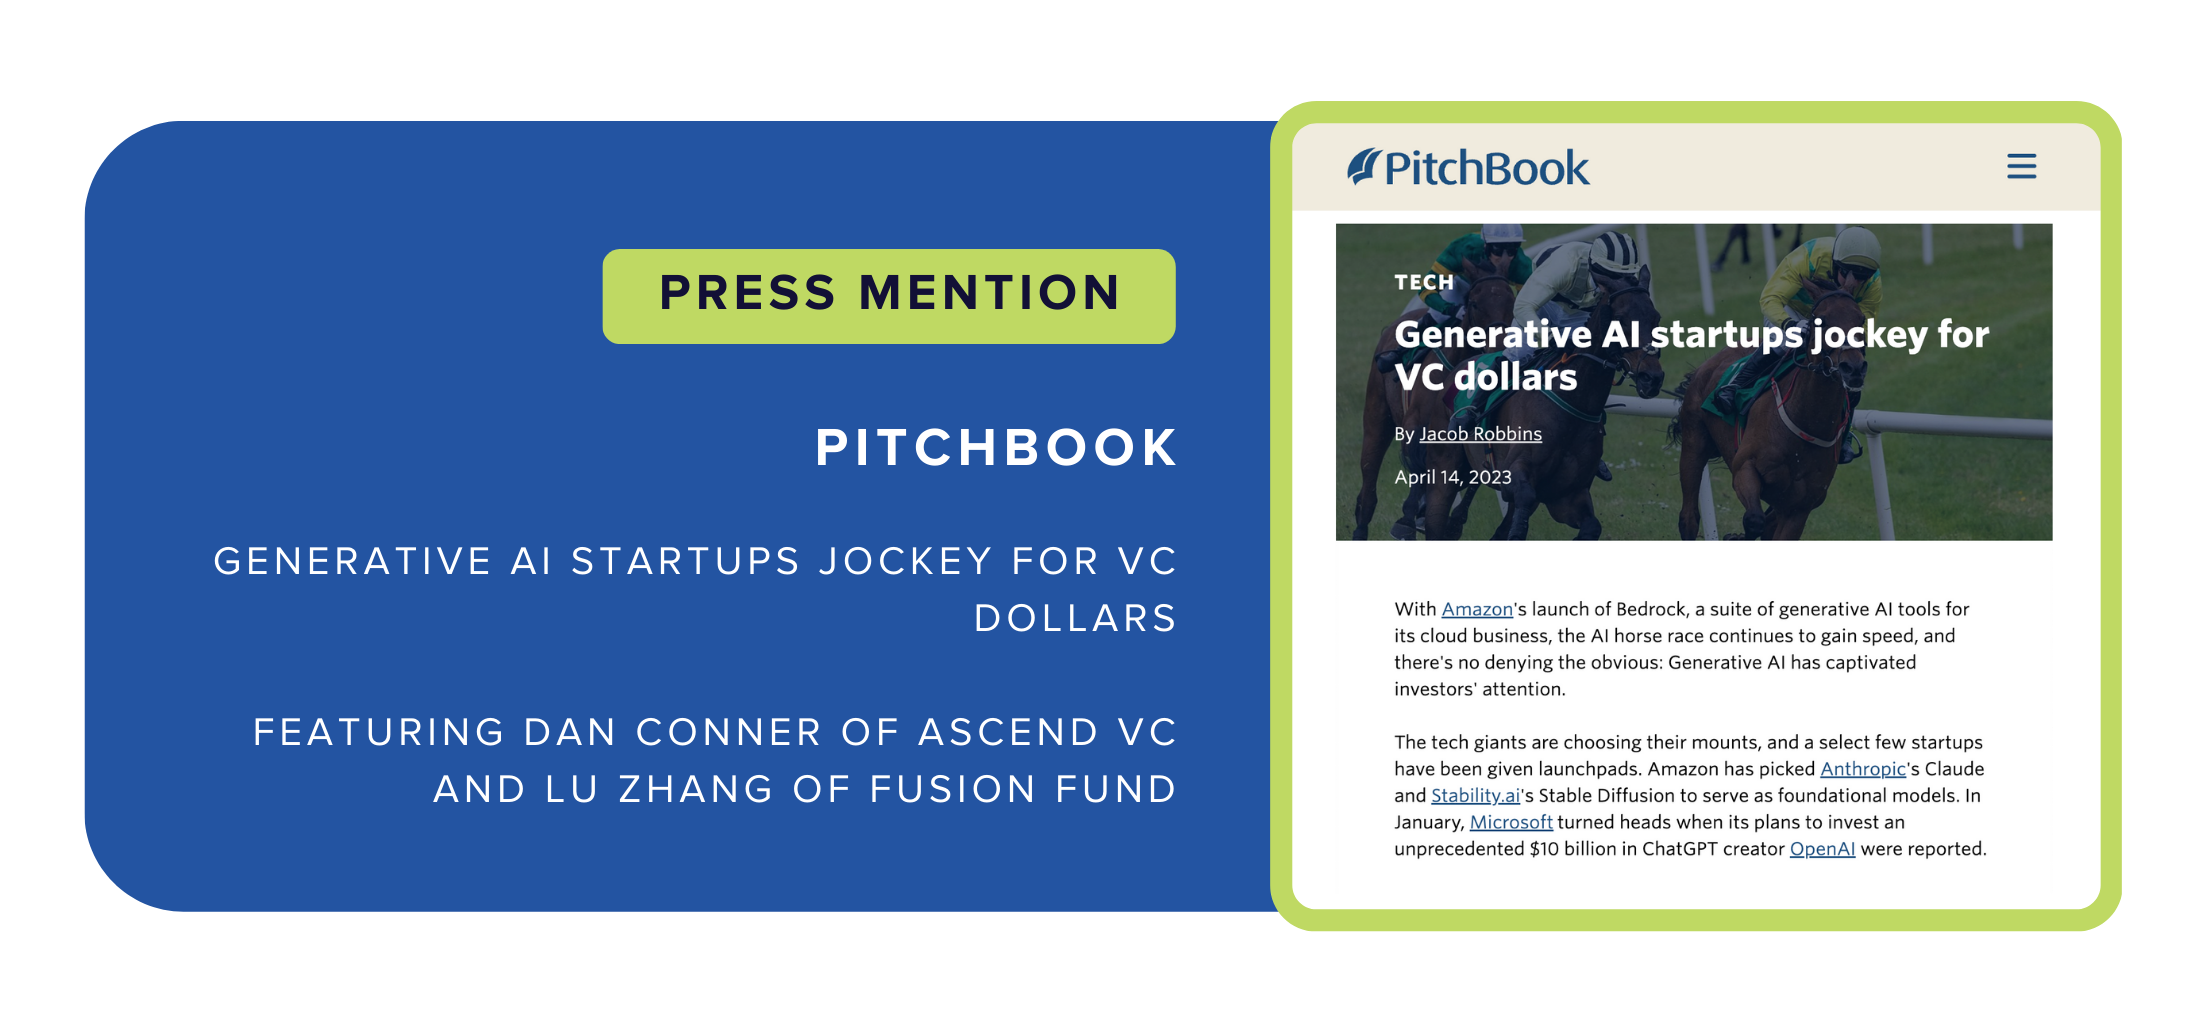 Press Mention in Pitchbook: "Generative AI startups jockey for VC dollars" featuring Dan Conner of Ascend VC and Lu Zhang of Fusion Fund